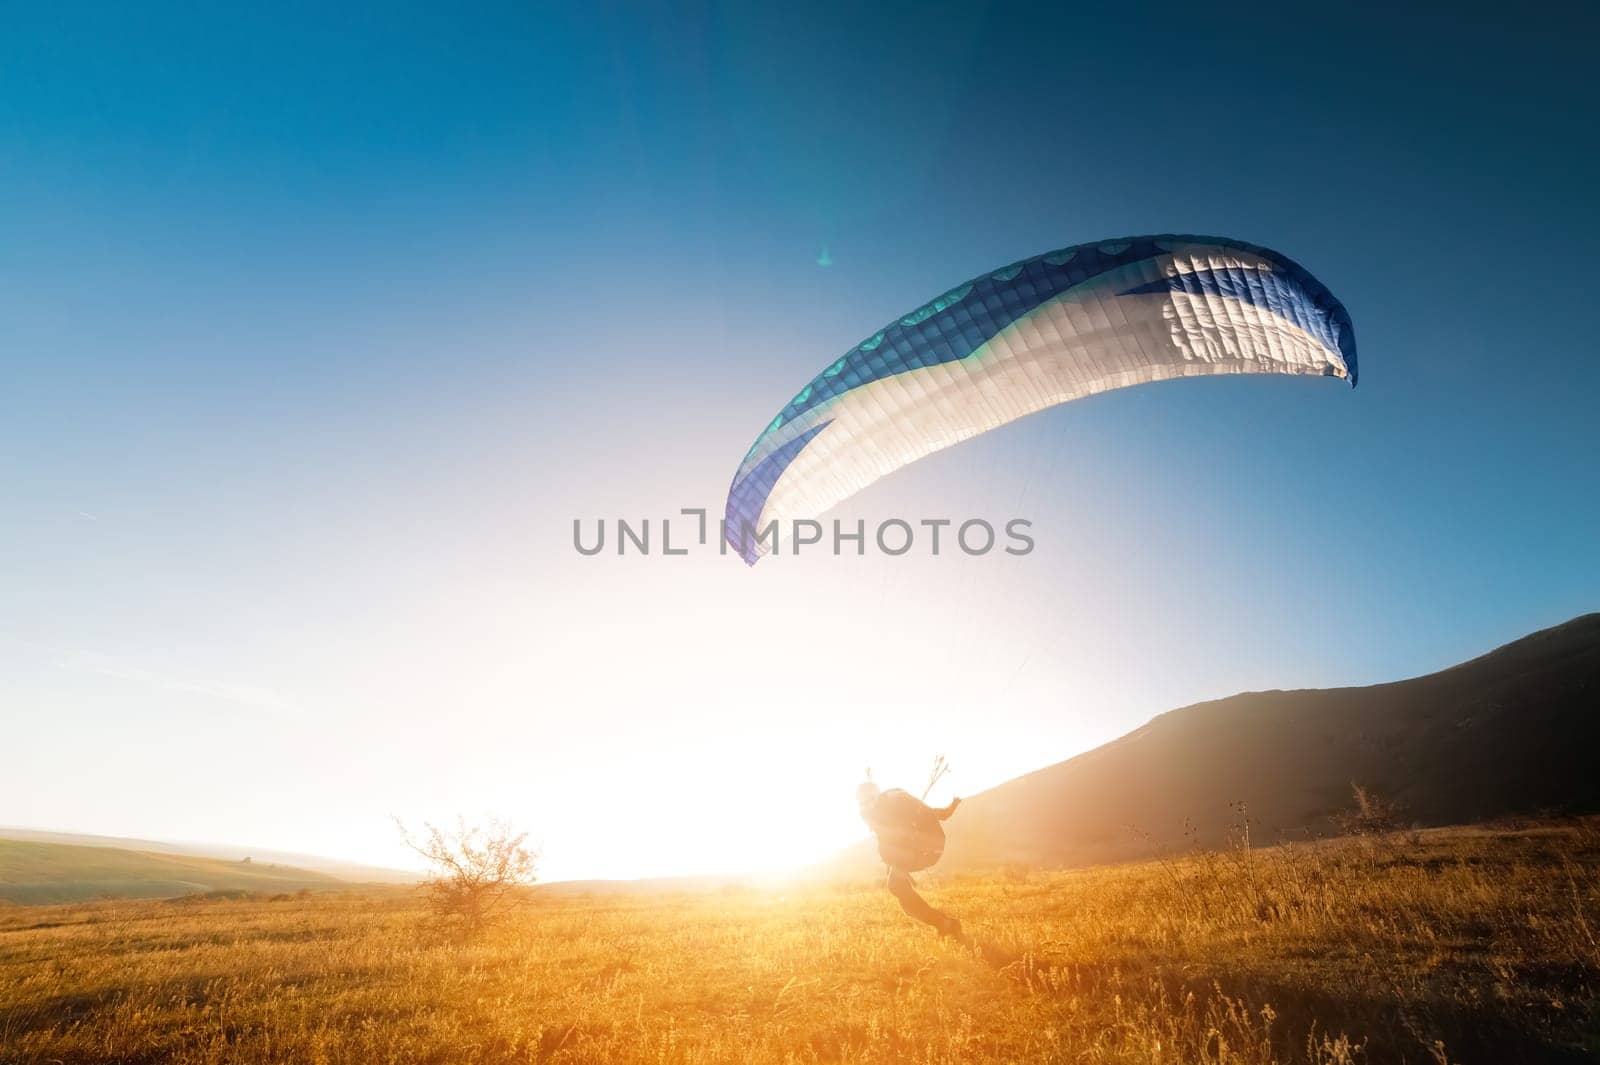 Launching a speedwing from a mountain. A paraglider is preparing to take off from a mountain, running along the yellow autumn grass against the sun.